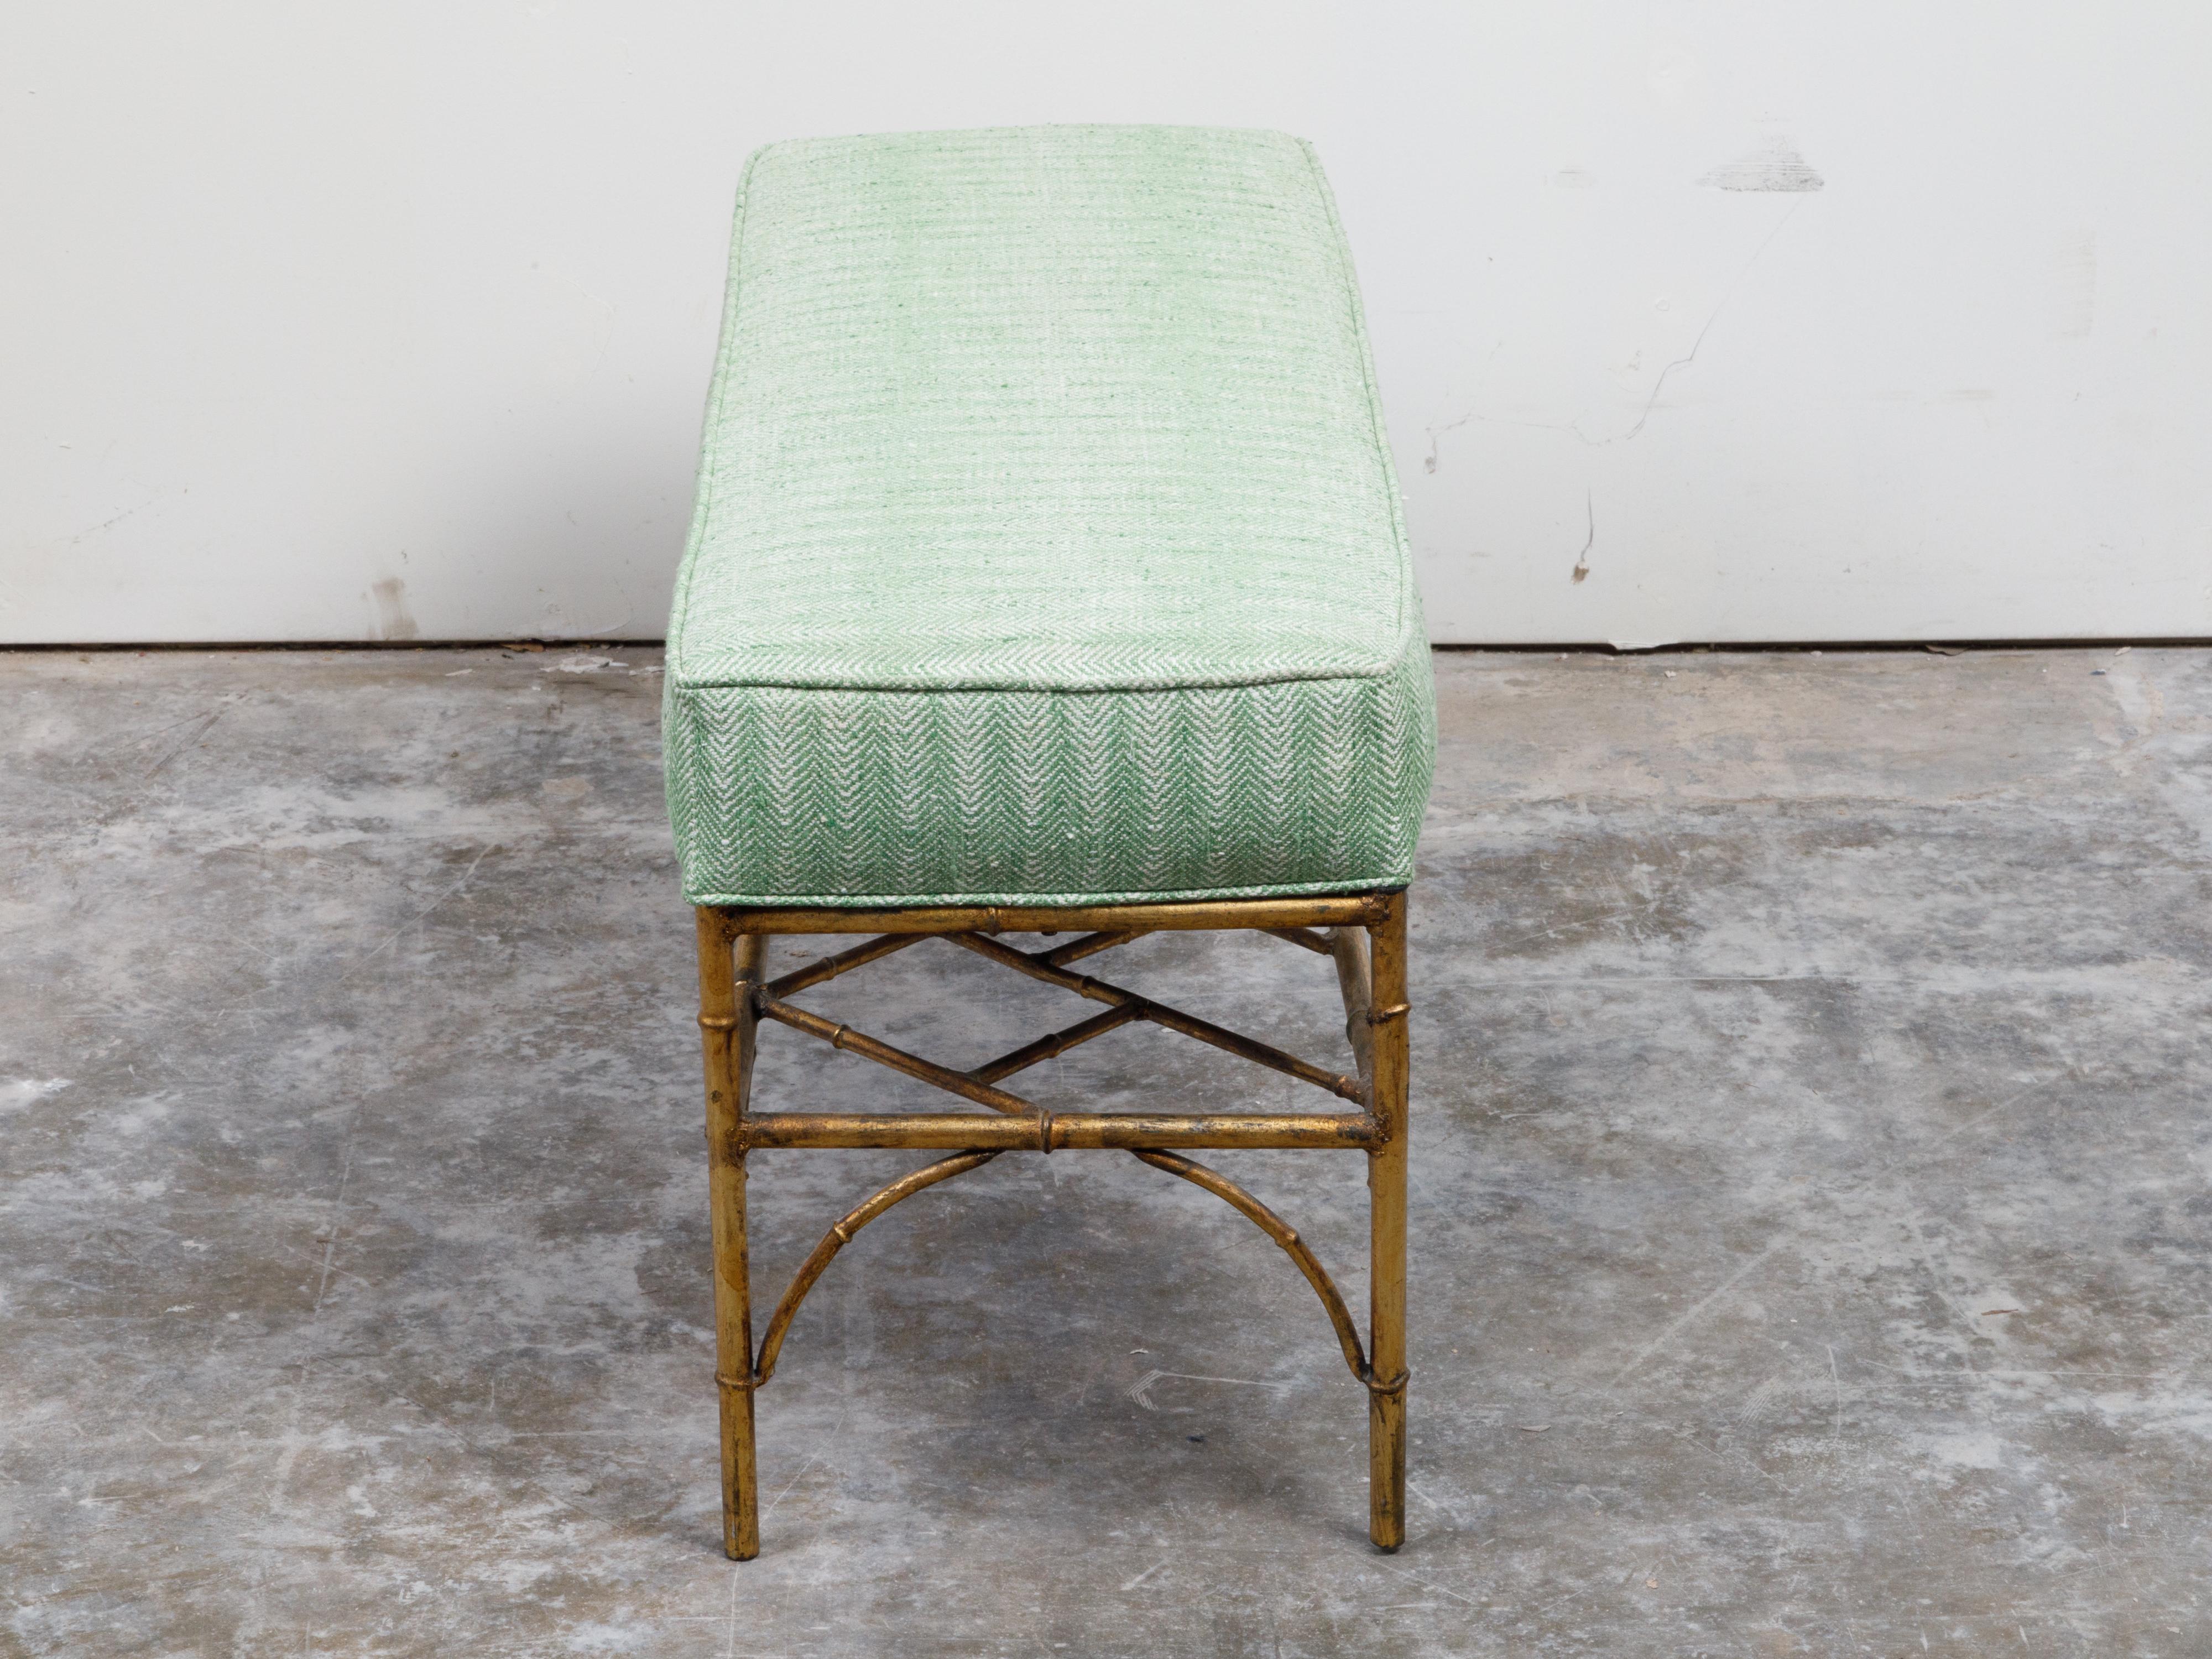 Italian Midcentury Gilt Metal Faux Bamboo Bench with Green Upholstered Seat  For Sale at 1stDibs